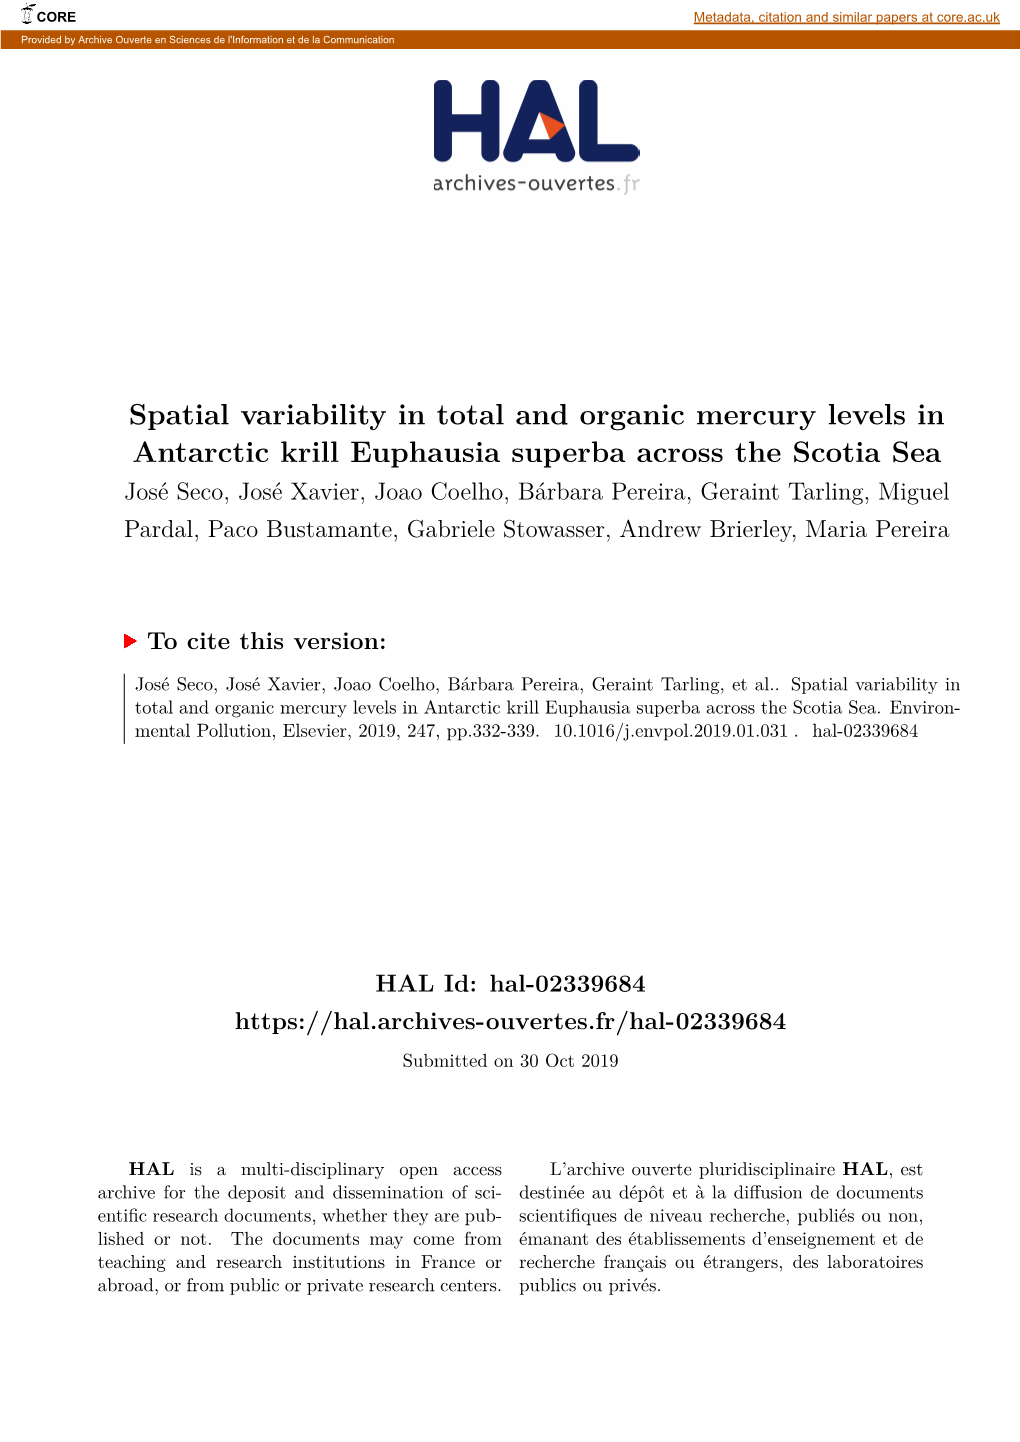 Spatial Variability in Total and Organic Mercury Levels in Antarctic Krill